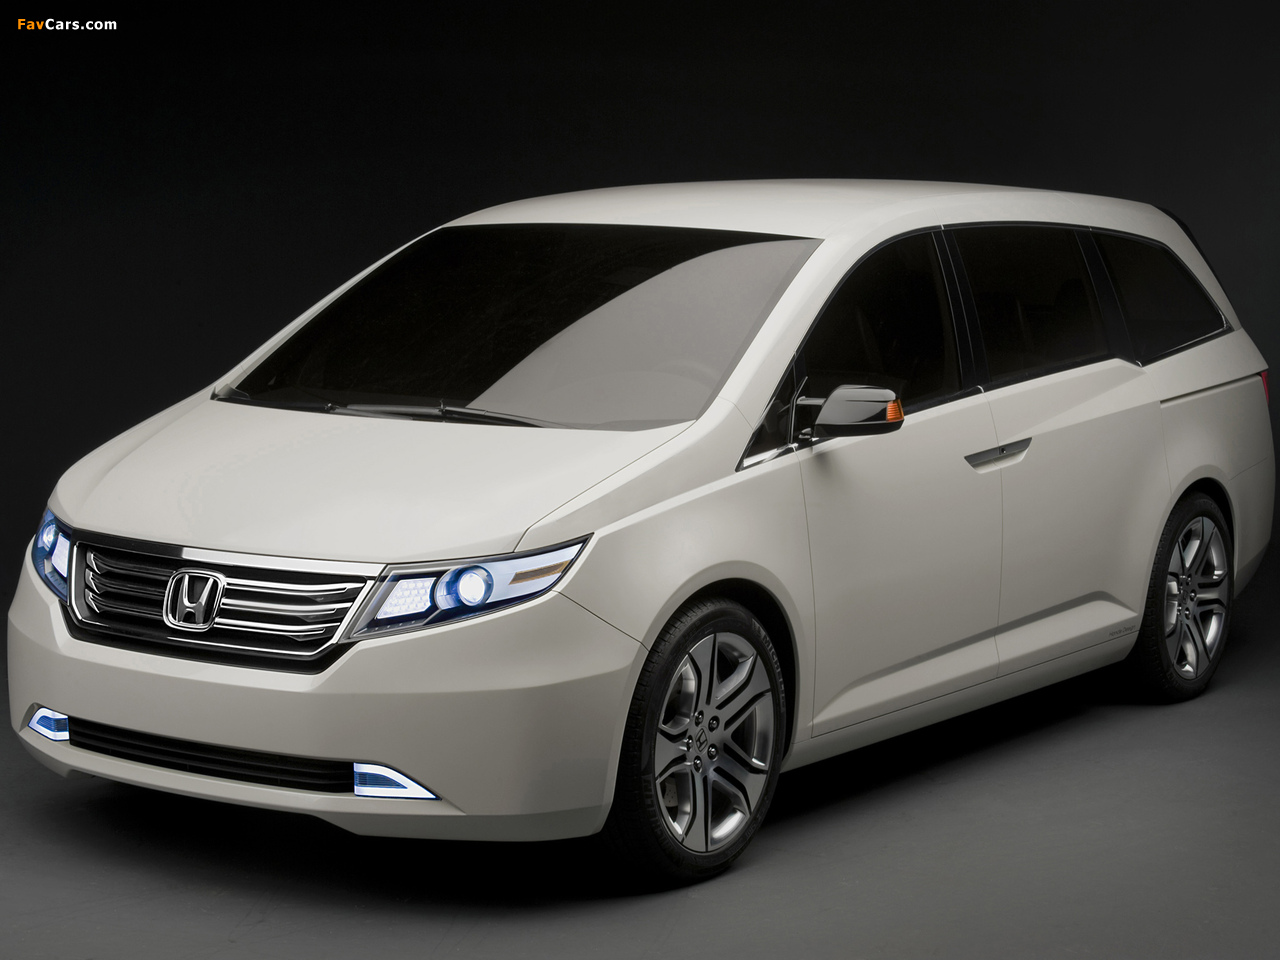 Honda Odyssey Concept 2010 pictures (1280 x 960)